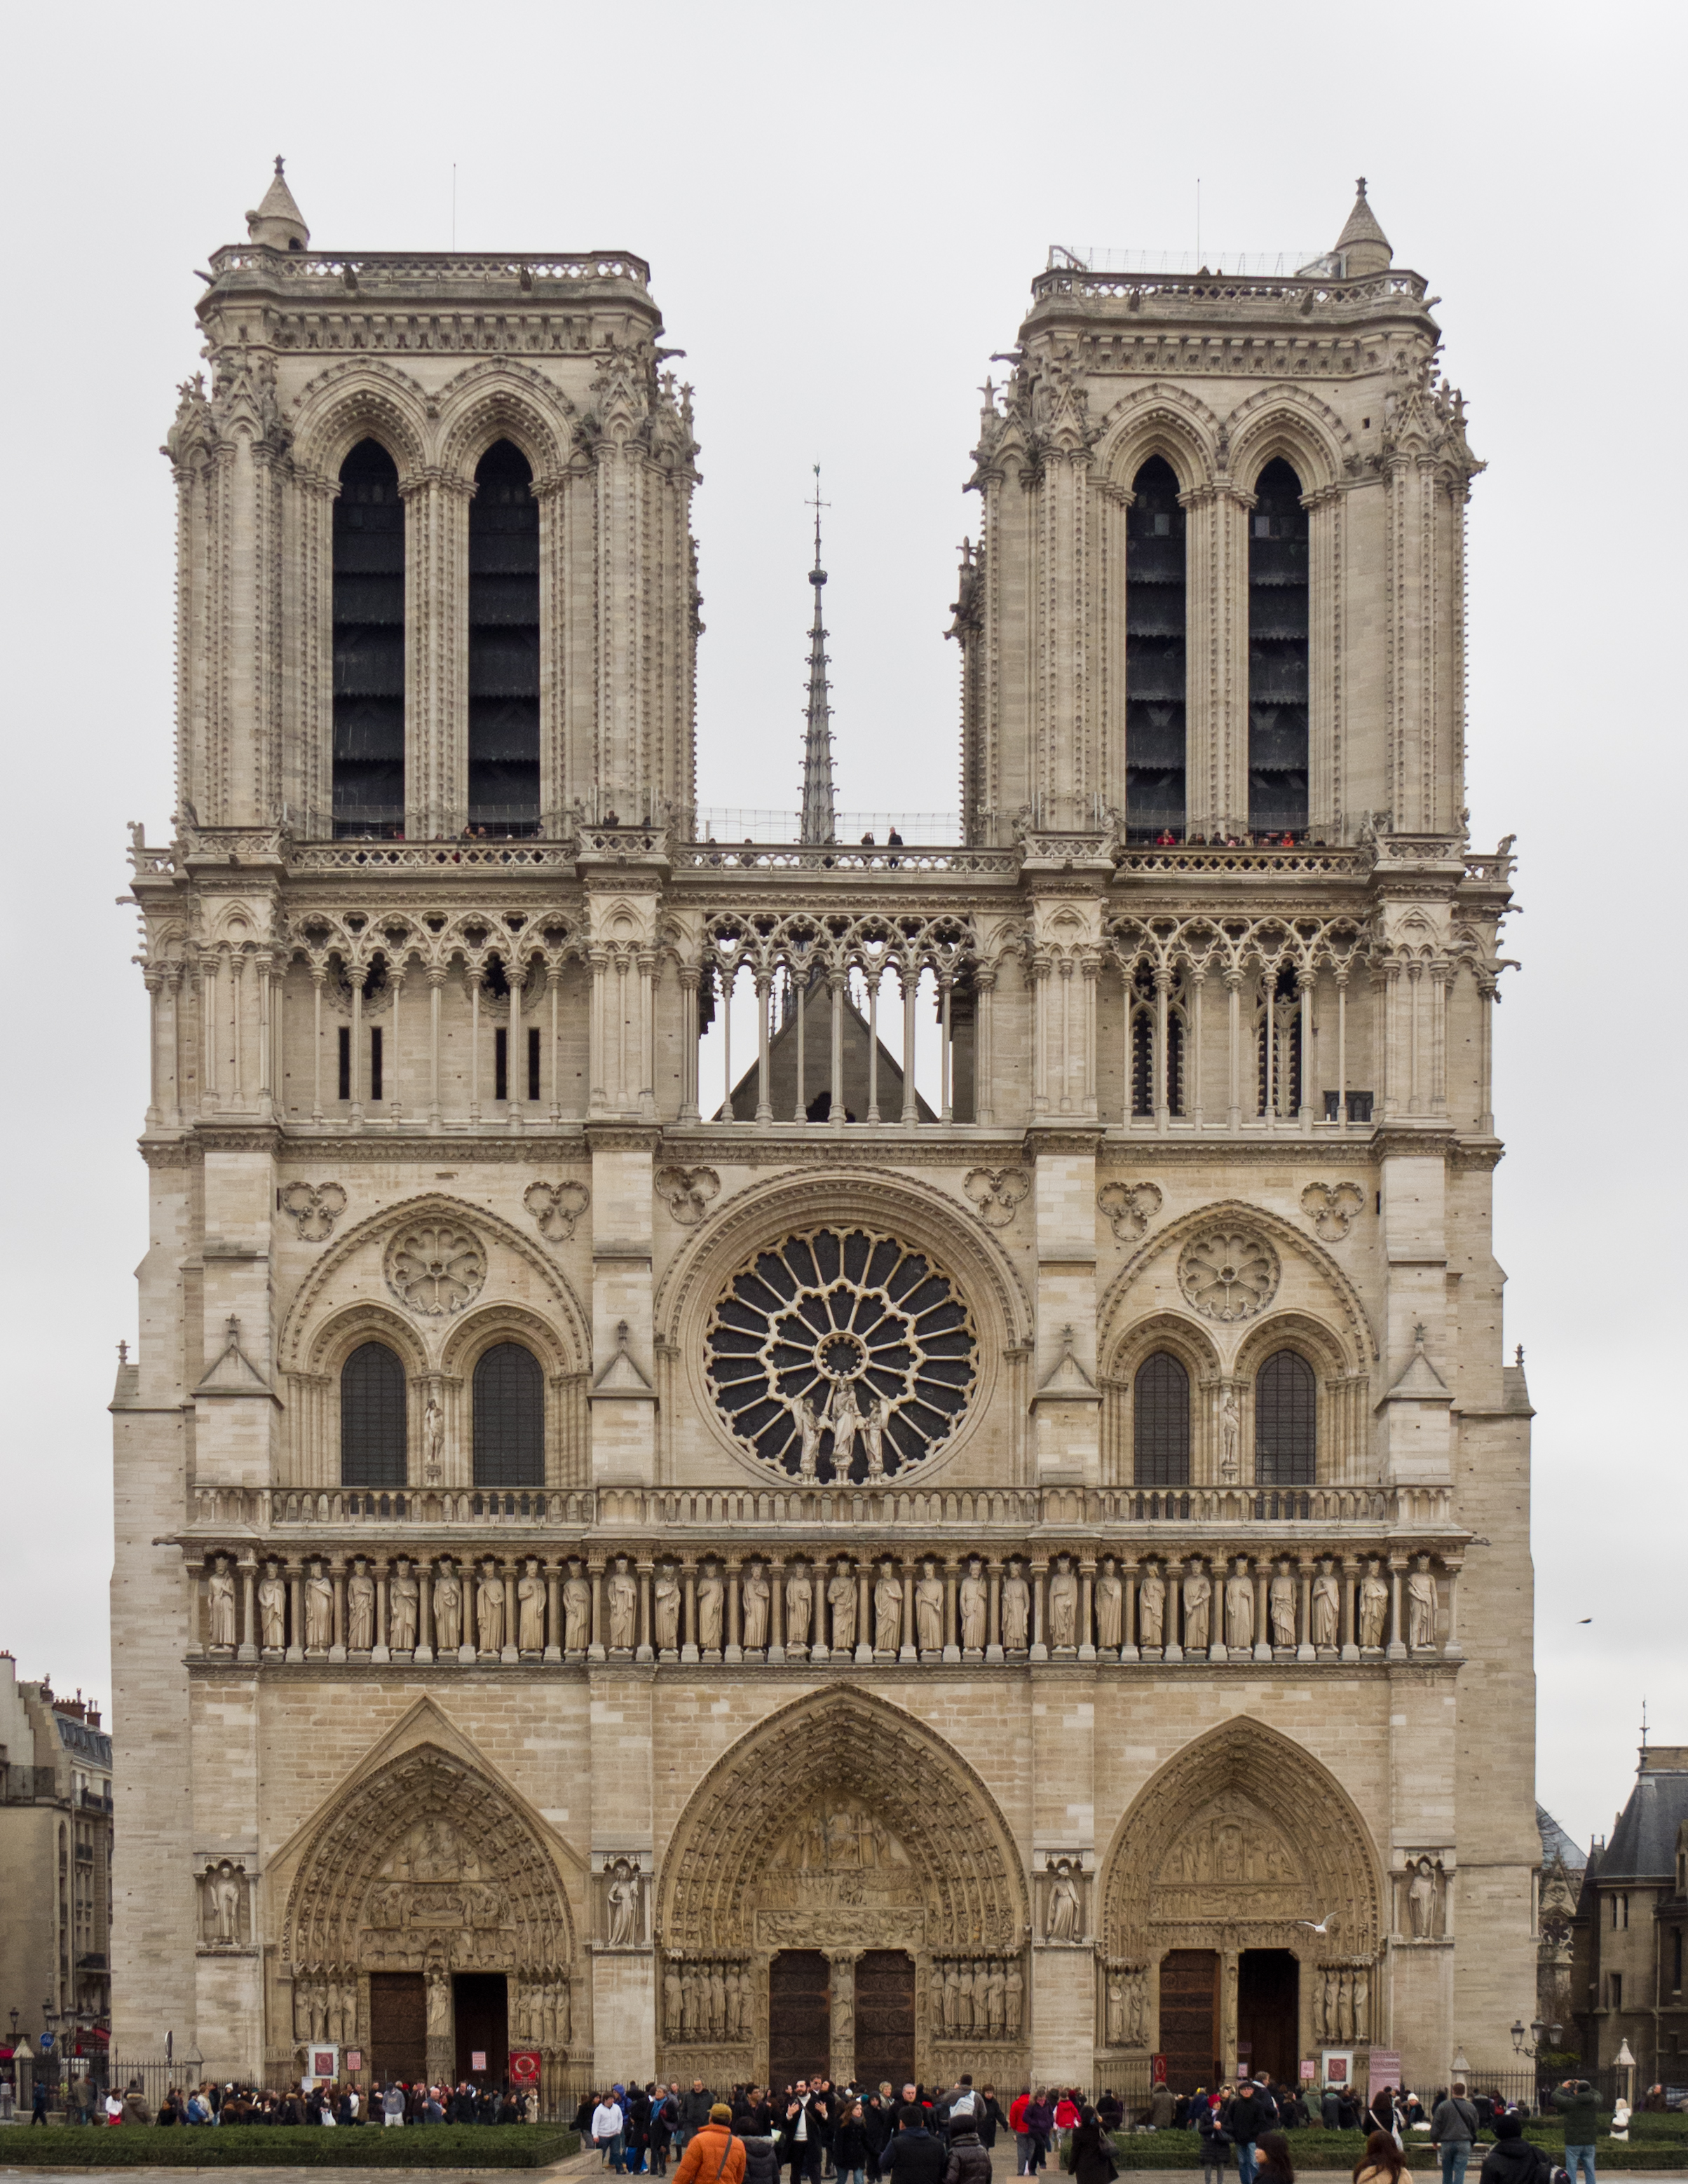 Photo of Notre Dame from the outside. Two towers sit side by side with various ornate architectural details. There are three arched doorways along the ground, the second row has a circle center, with two side by side arches on either side, as well as a pointed tower in the center. 